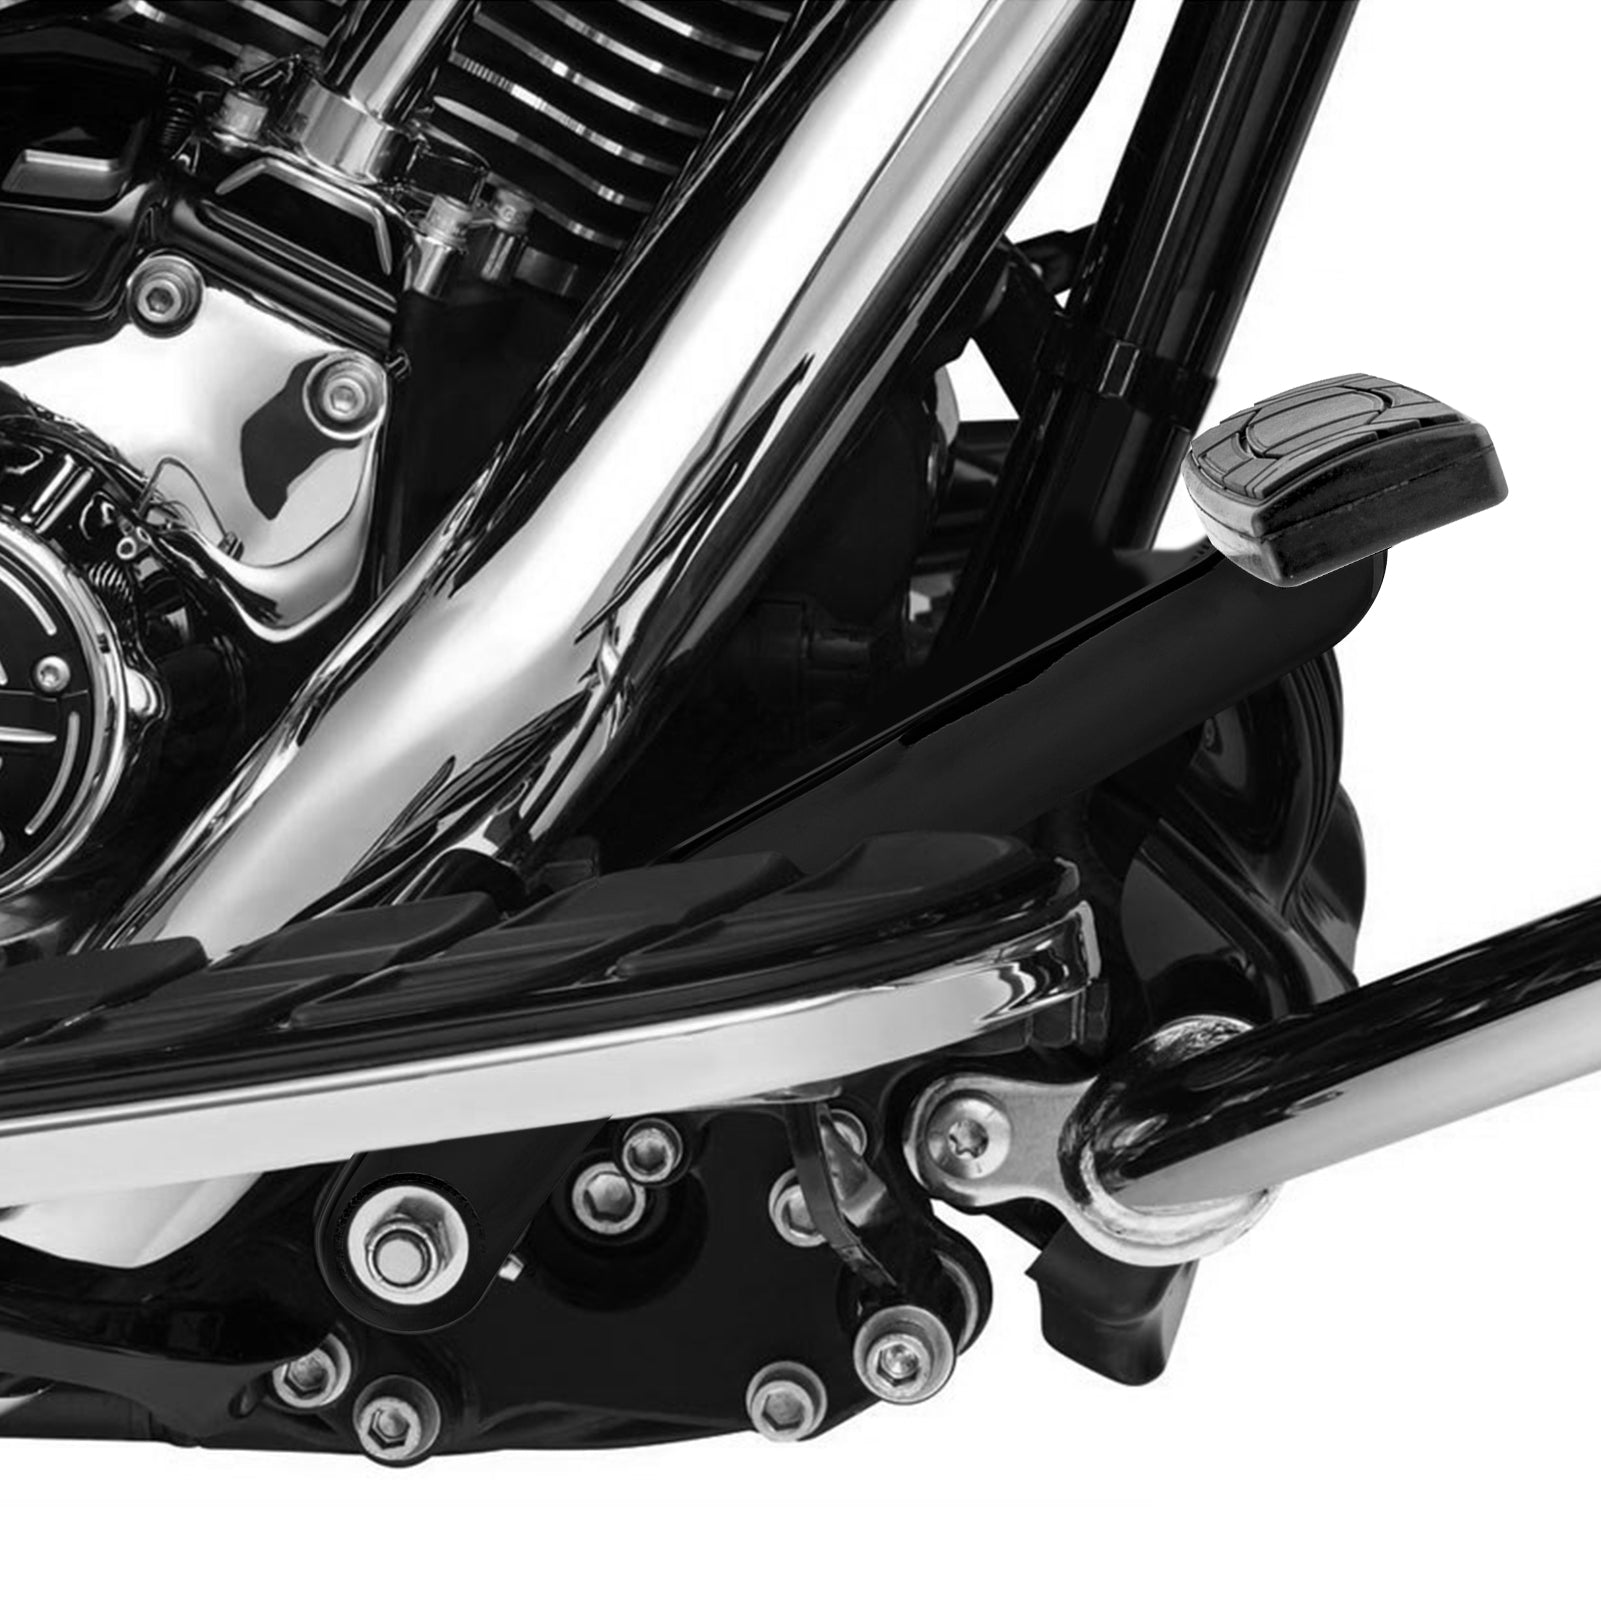 2014-2023 Harley Electra Glide Road Glide Road King Without Fairing Lowers Gloss Black Steel Extended Brake Pedals-6